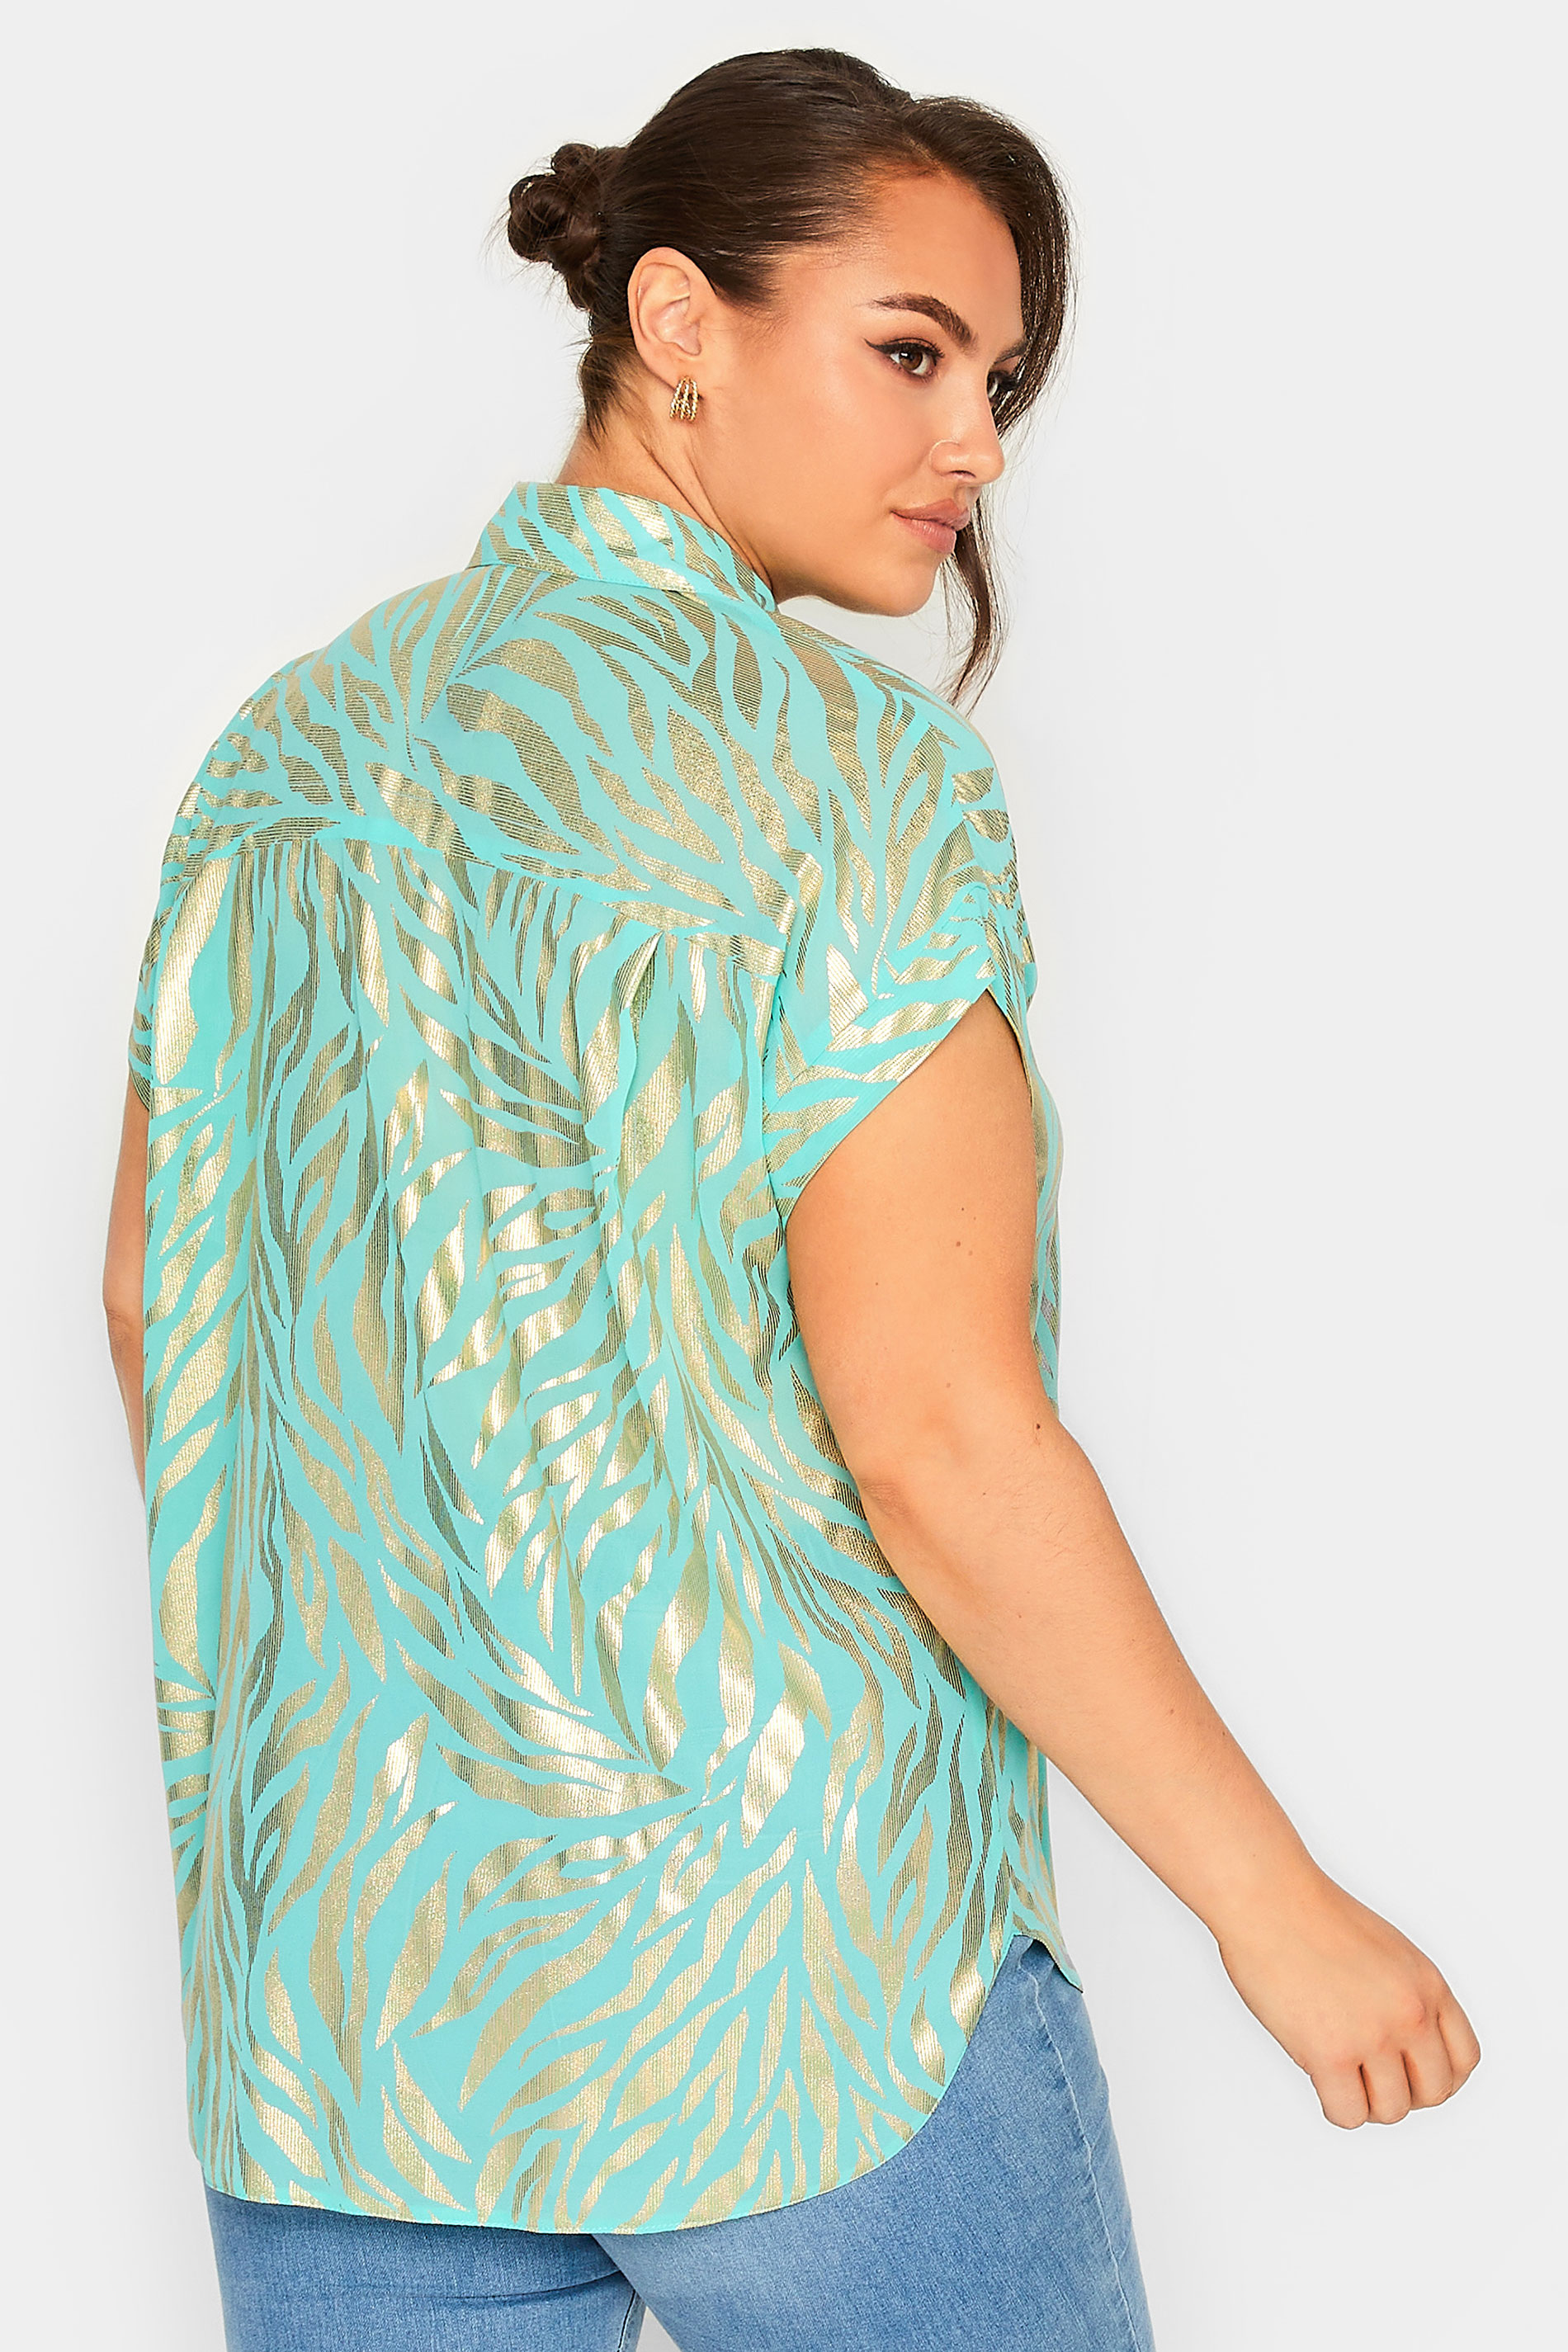 YOURS Curve Plus Size Mint Green & Gold Animal Print Shirt | Yours Clothing  3